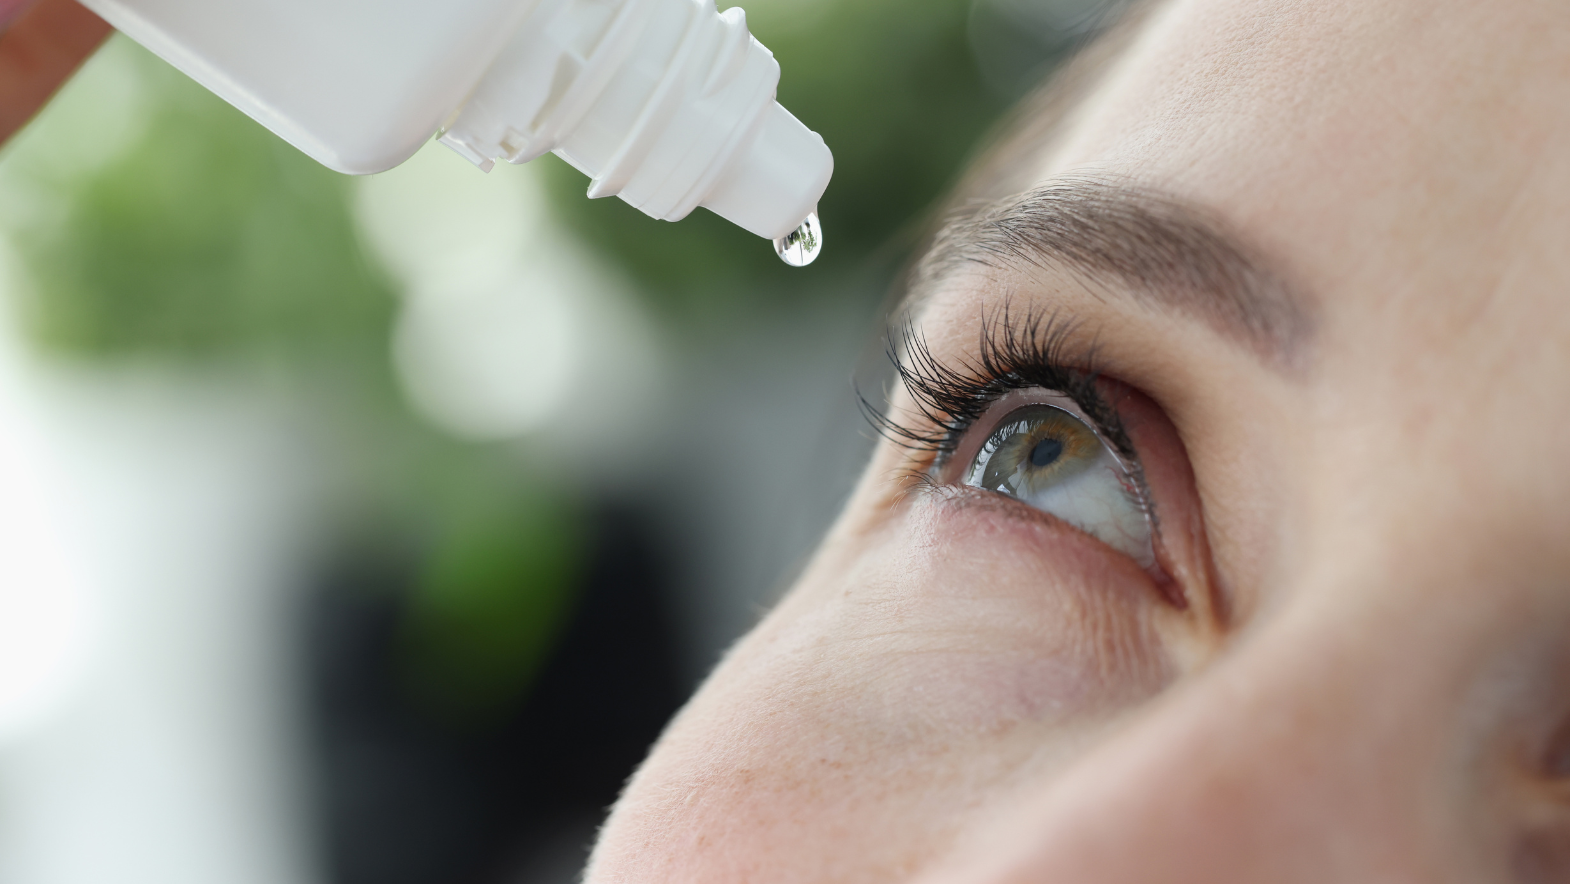 US FDA wants you to ditch these 2 eye drops US FDA wants you to ditch